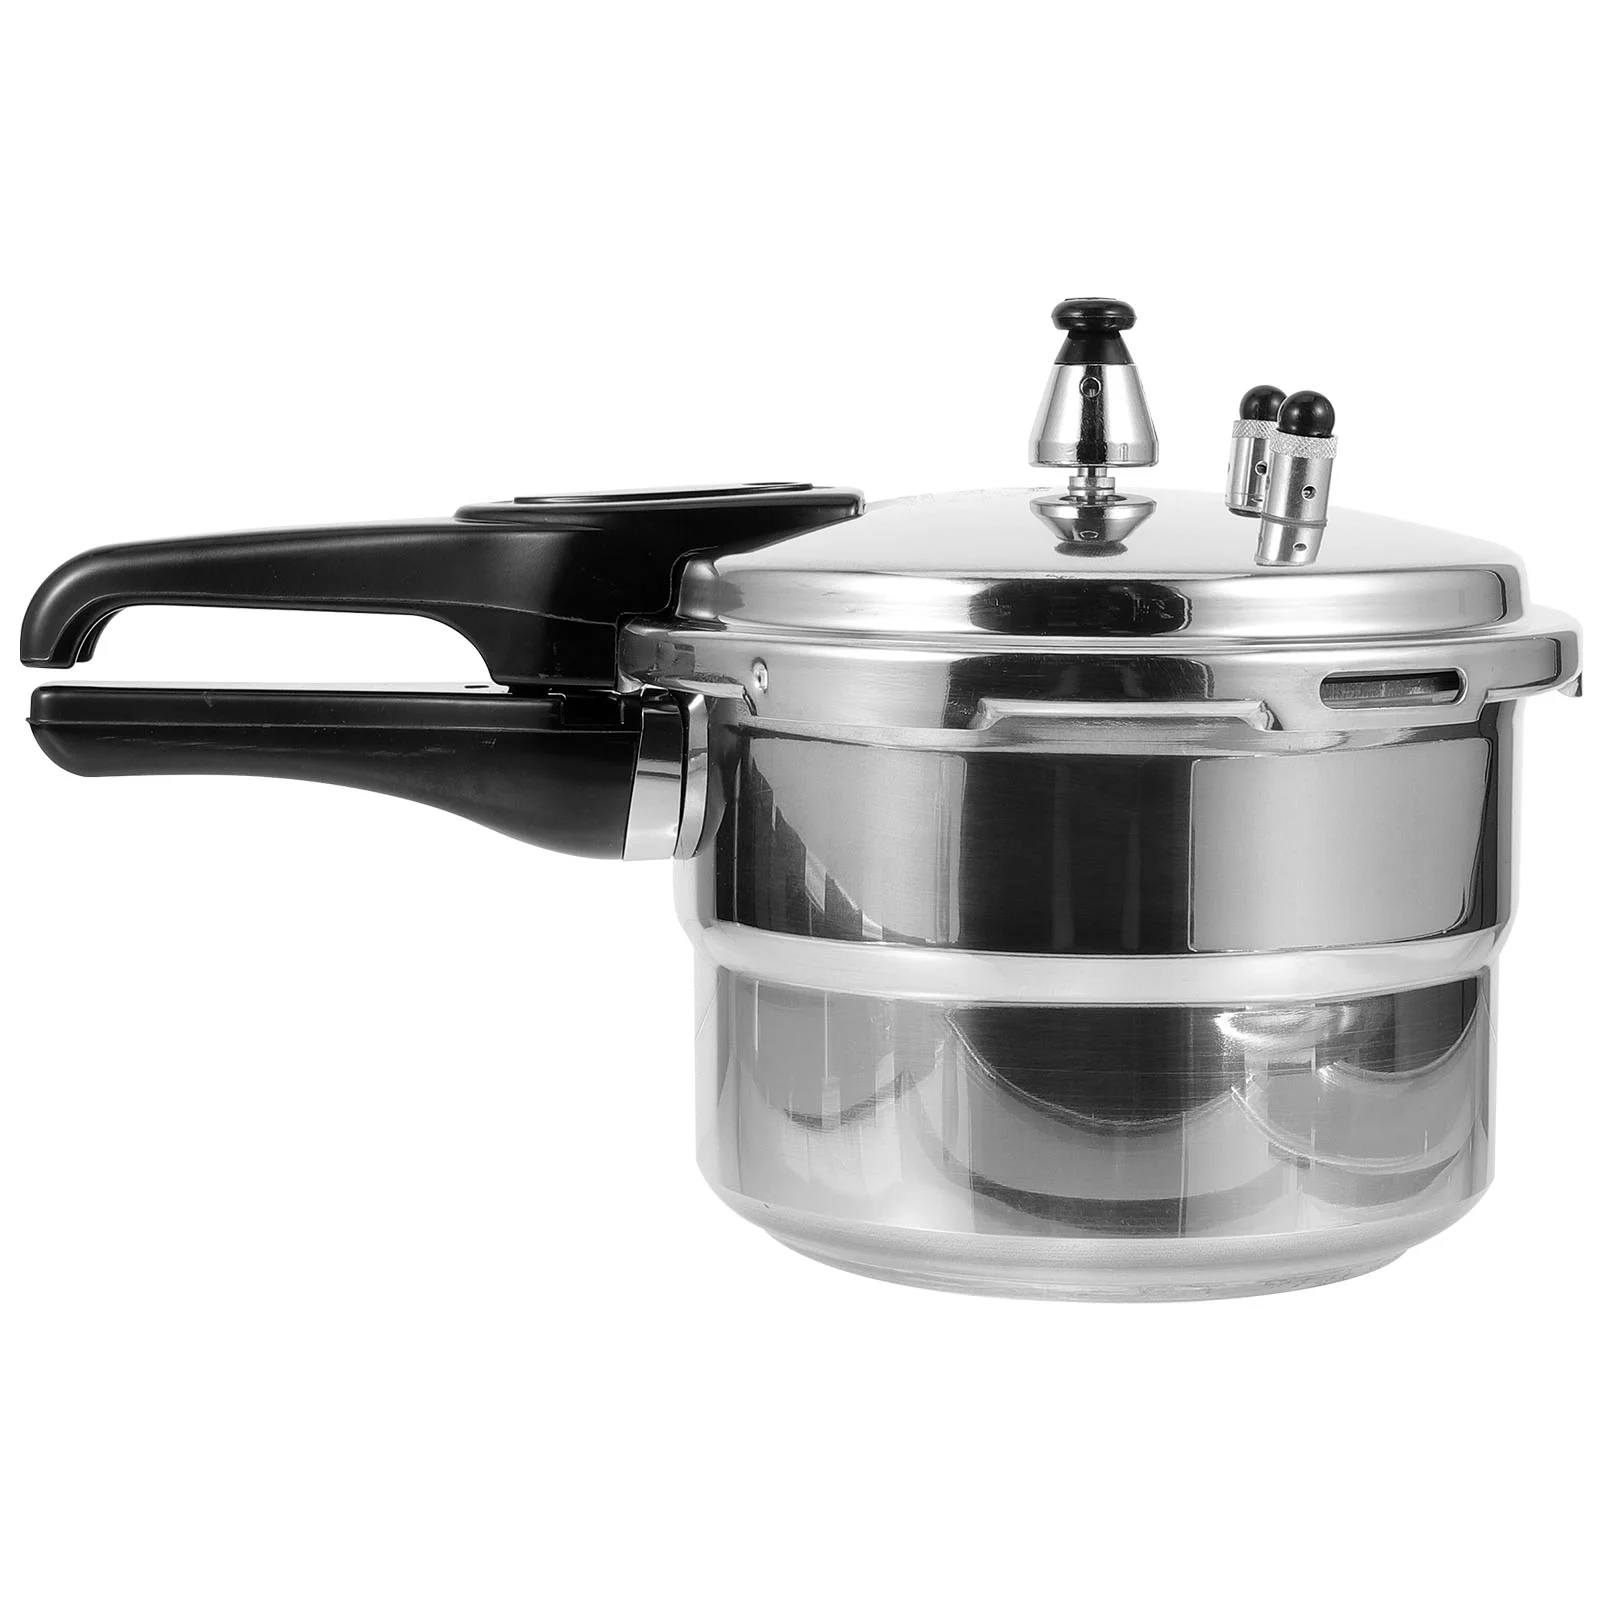 

Pressure Cooker Pot Canning Stove Cooking Induction Top Gas Steamer Instant Canner Aluminum High Steaming Stewing Jars Tall Cook